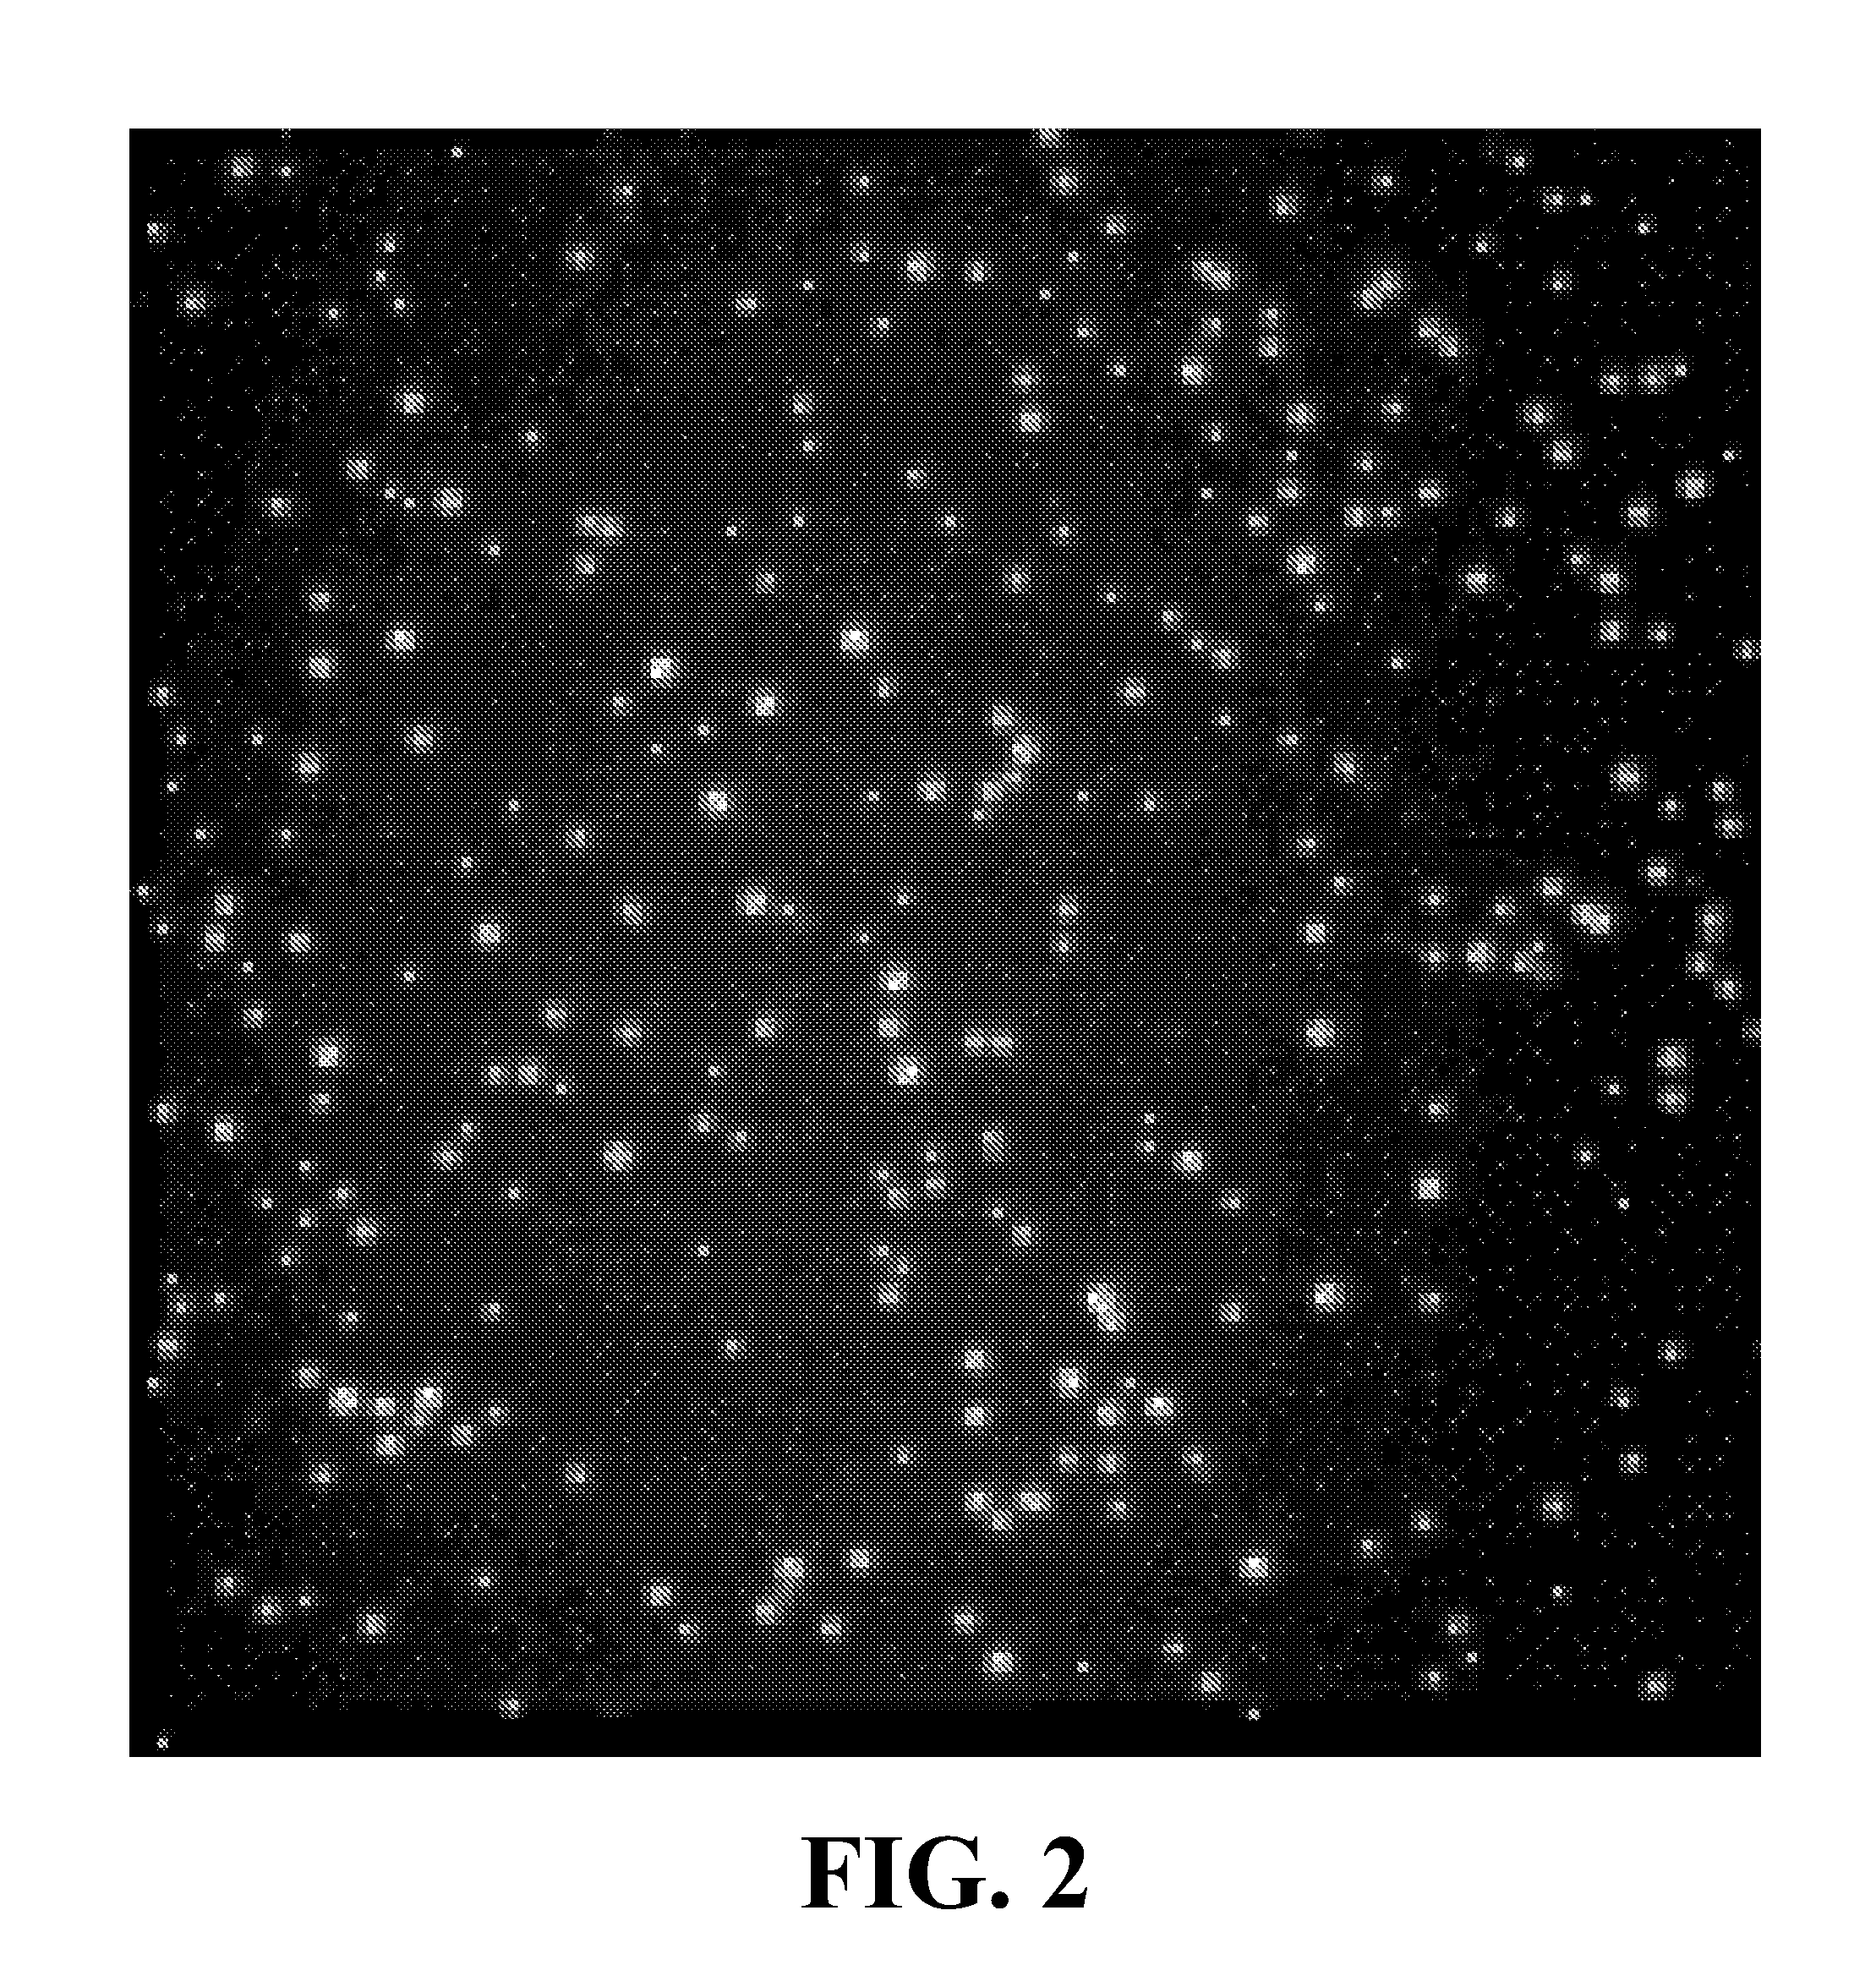 Method for analyzing dynamic detectable events at the single molecule level